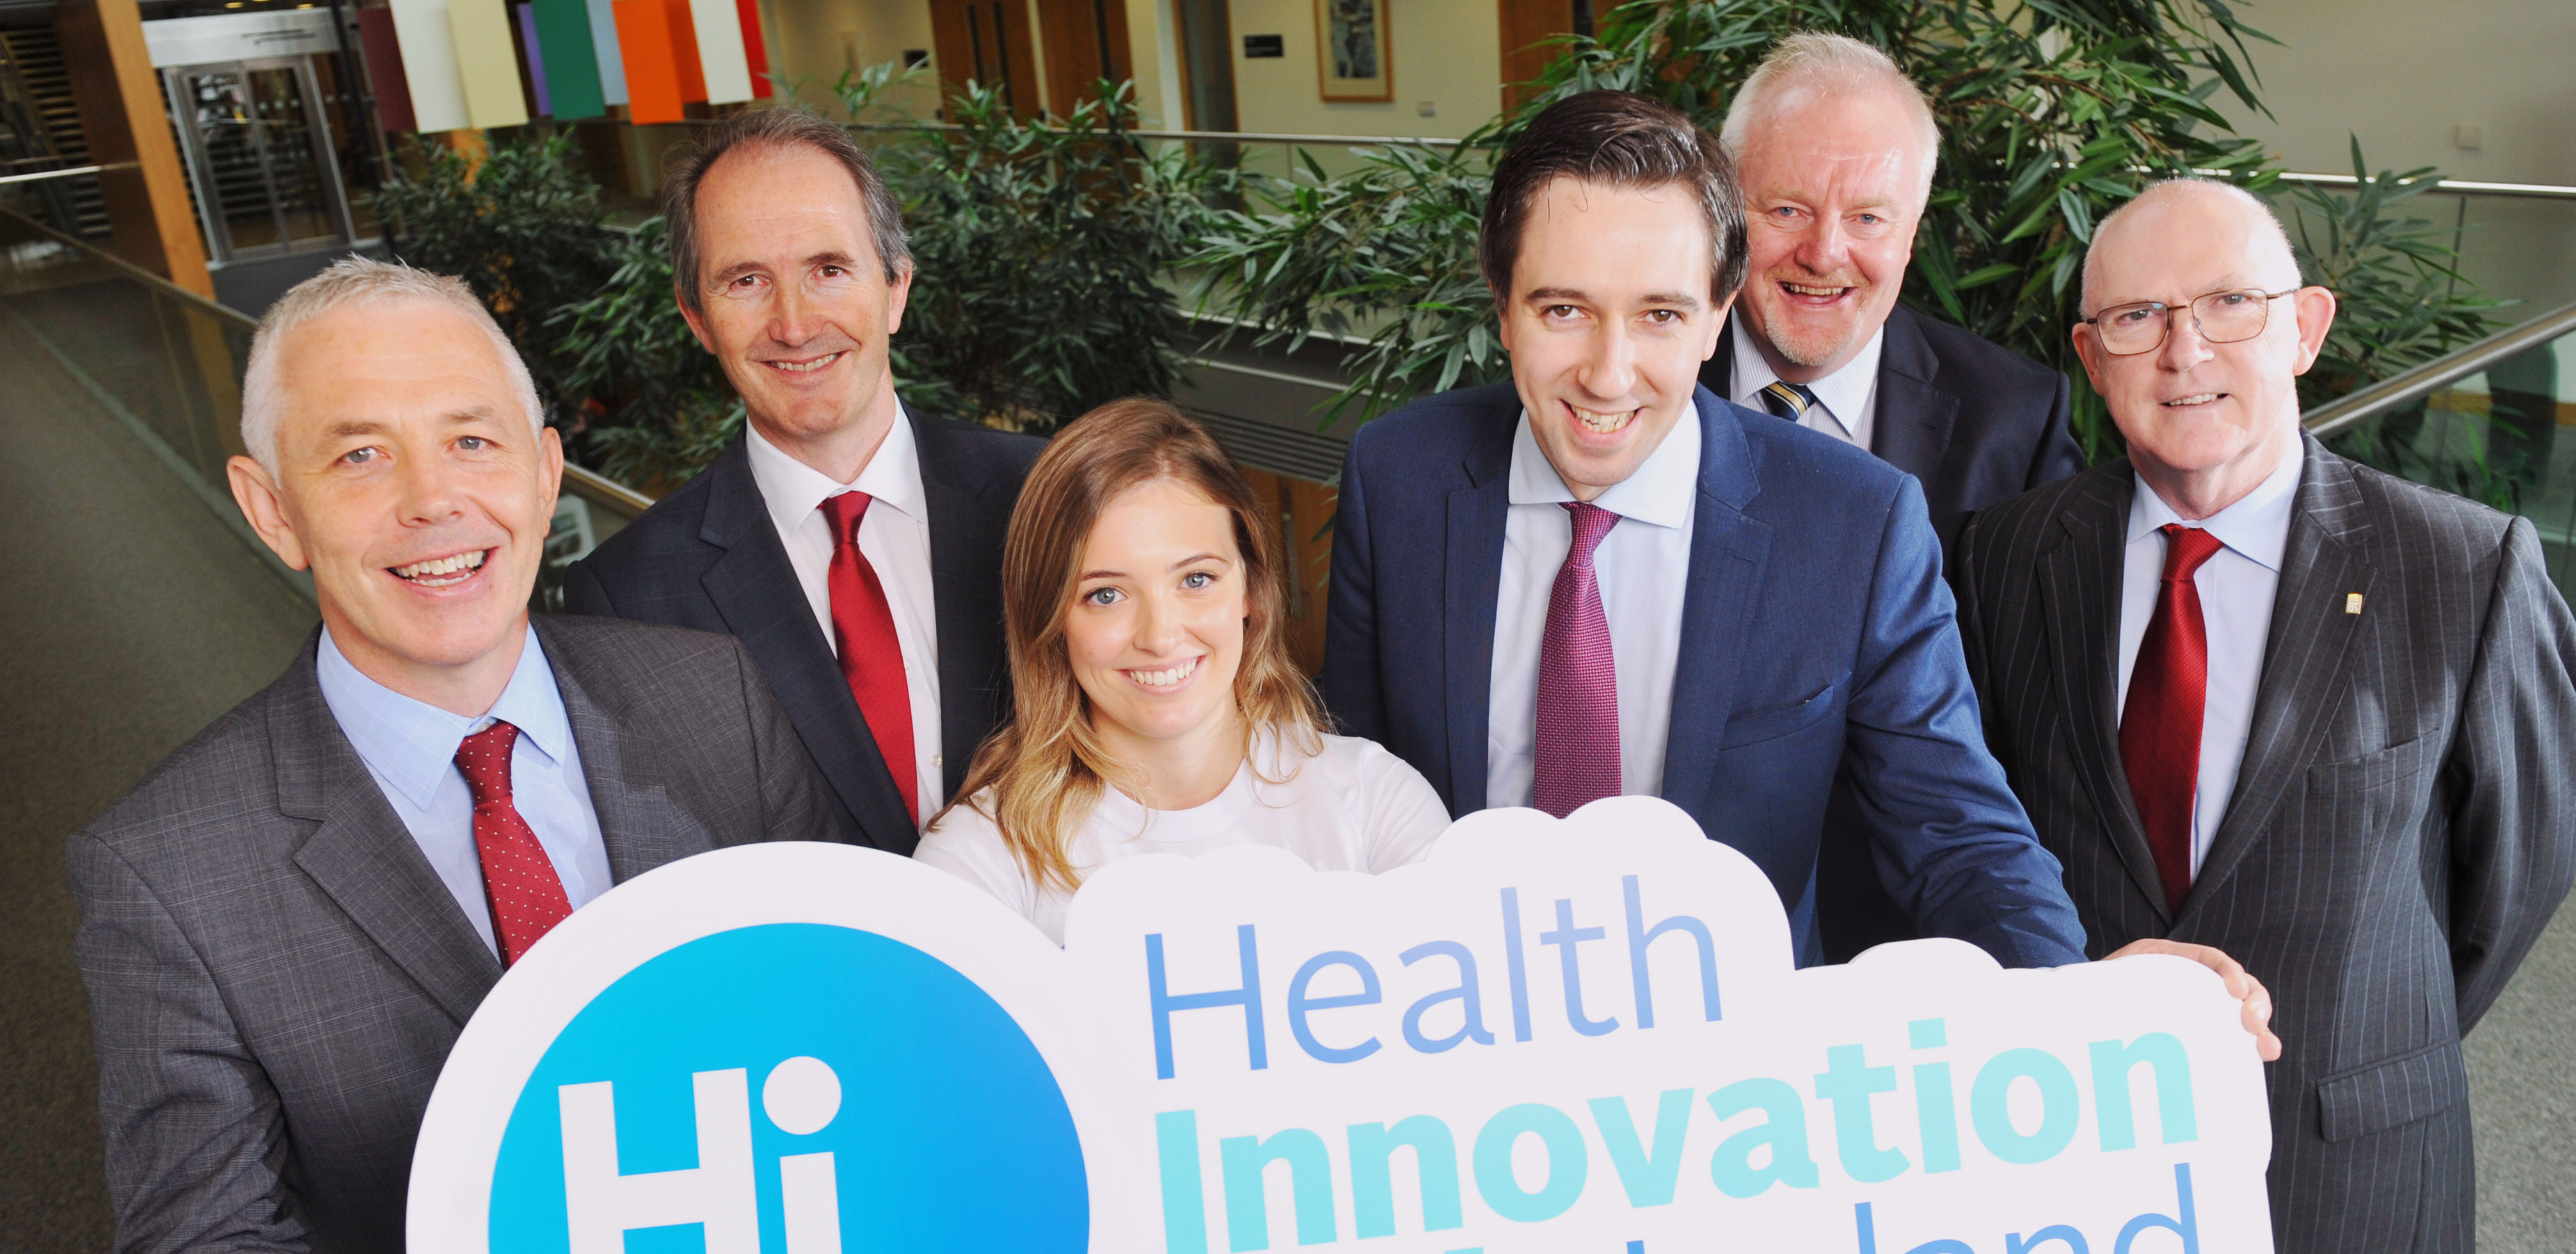 Minister launches Health Innovation Hub Ireland at UCC 